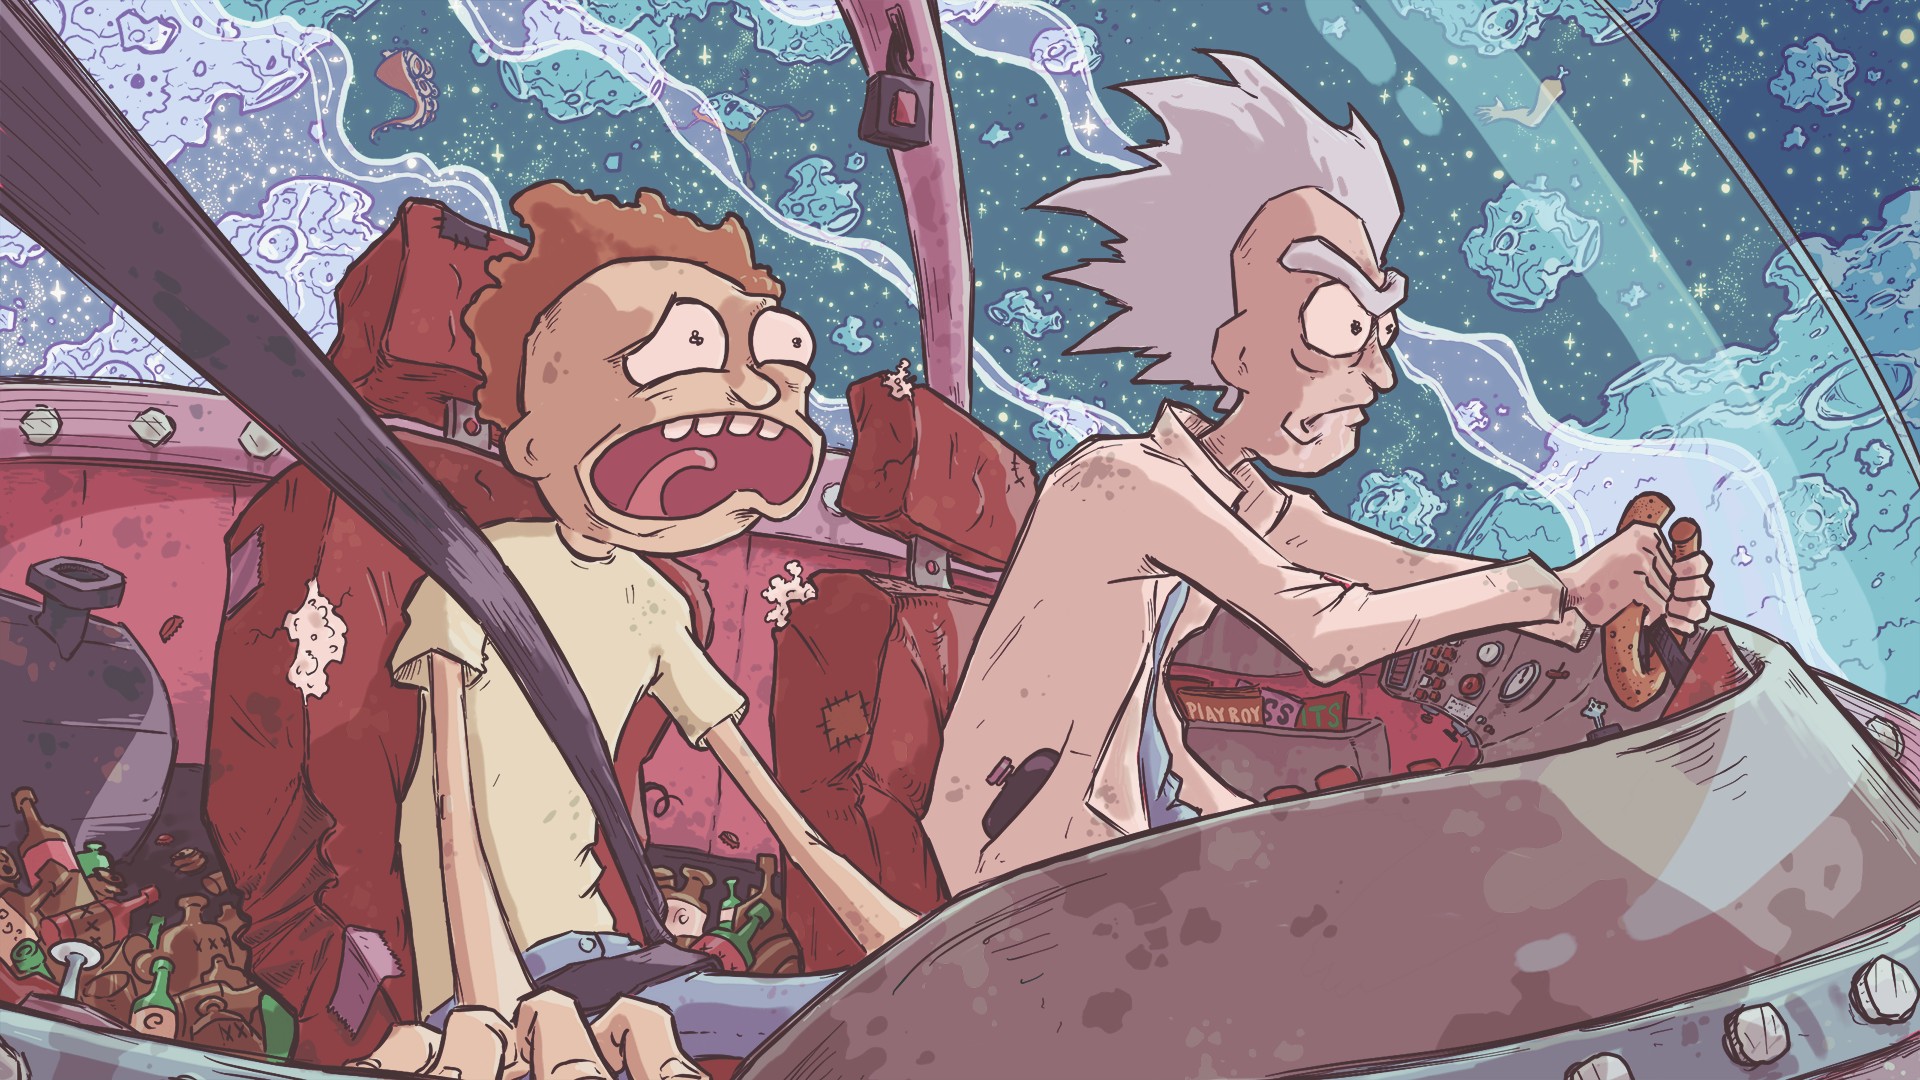 Rick and Morty wallpaper 1080p ·① Download free stunning High Resolution backgrounds for desktop ...